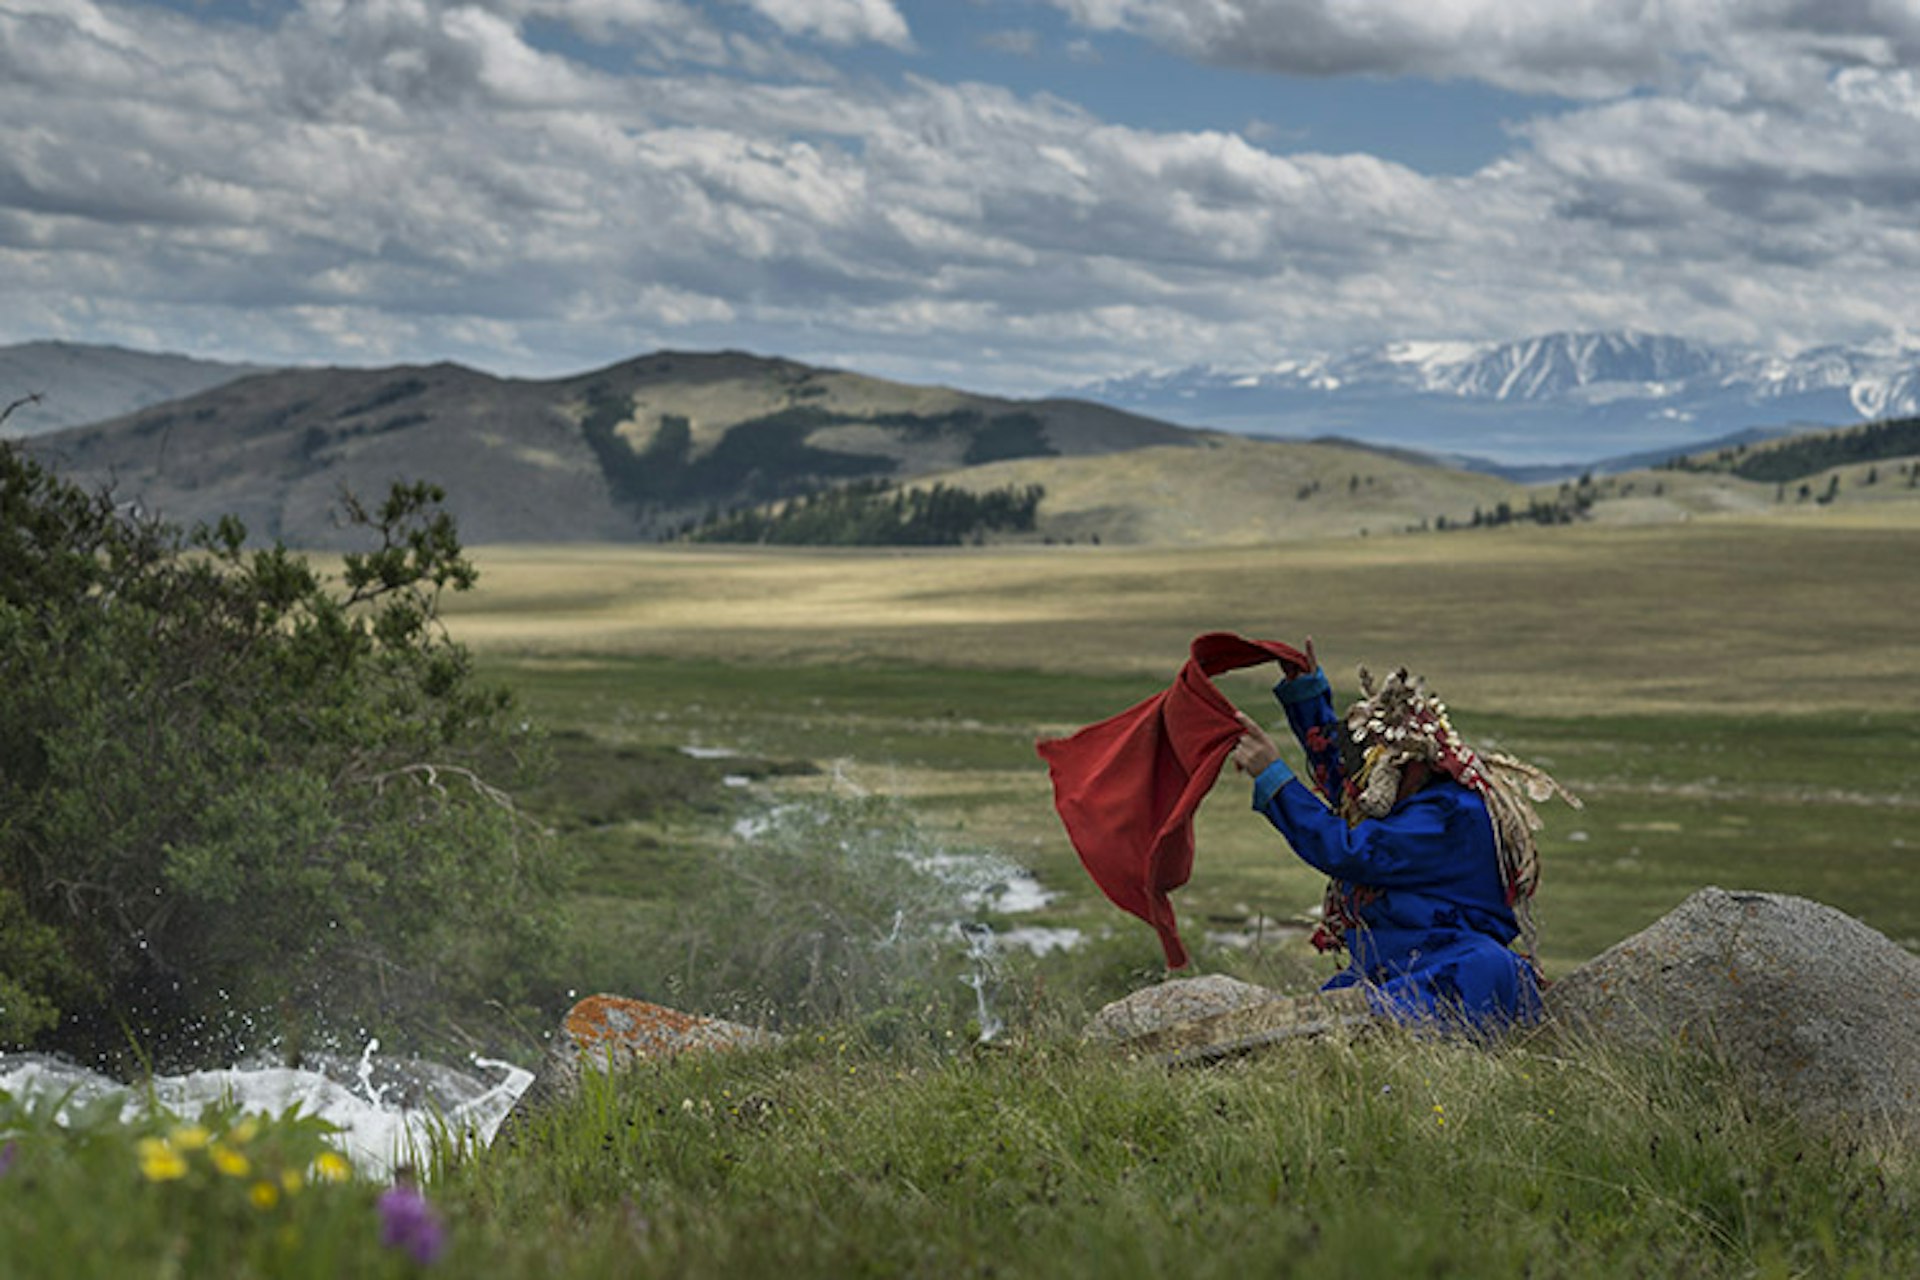 The ritual includes waving a red cloth over furs. Image by David Baxendale / Lonely Planet